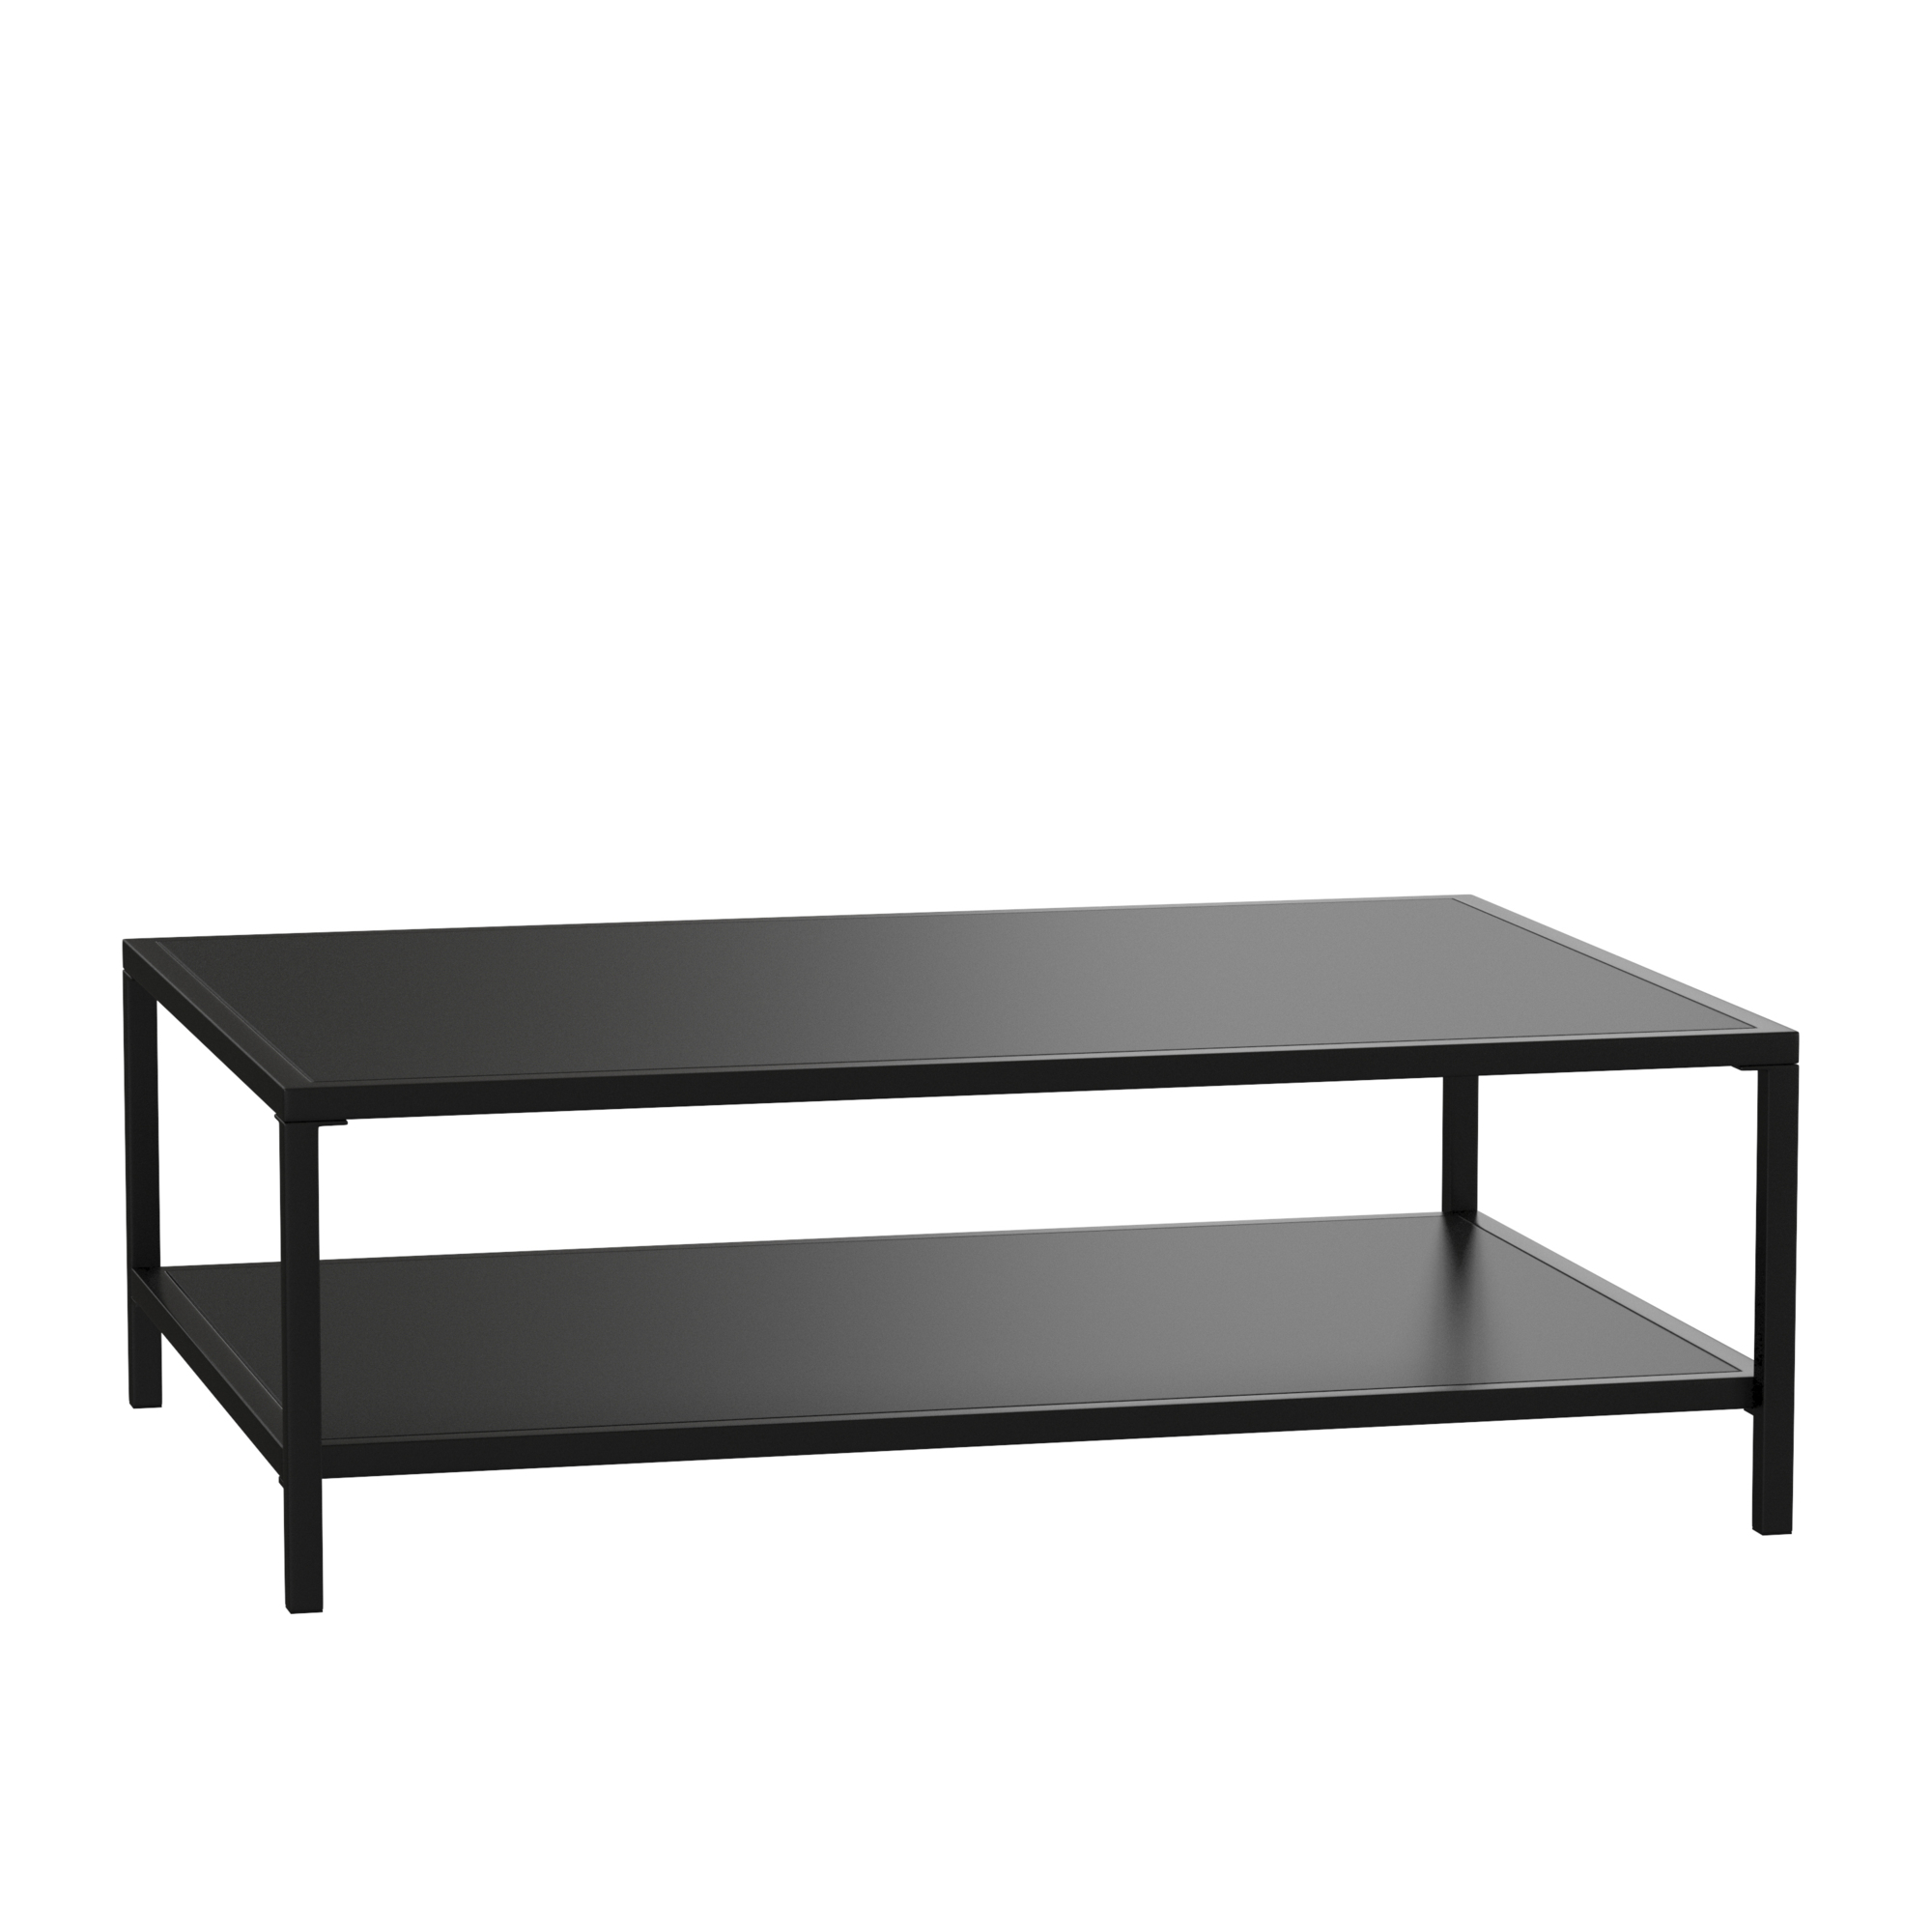 Flash Furniture, Black Indoor/Outdoor Coffee Table with Storage, Table Shape Rectangle, Primary Color Black, Height 15 in, Model XUT6R60USO2TBK